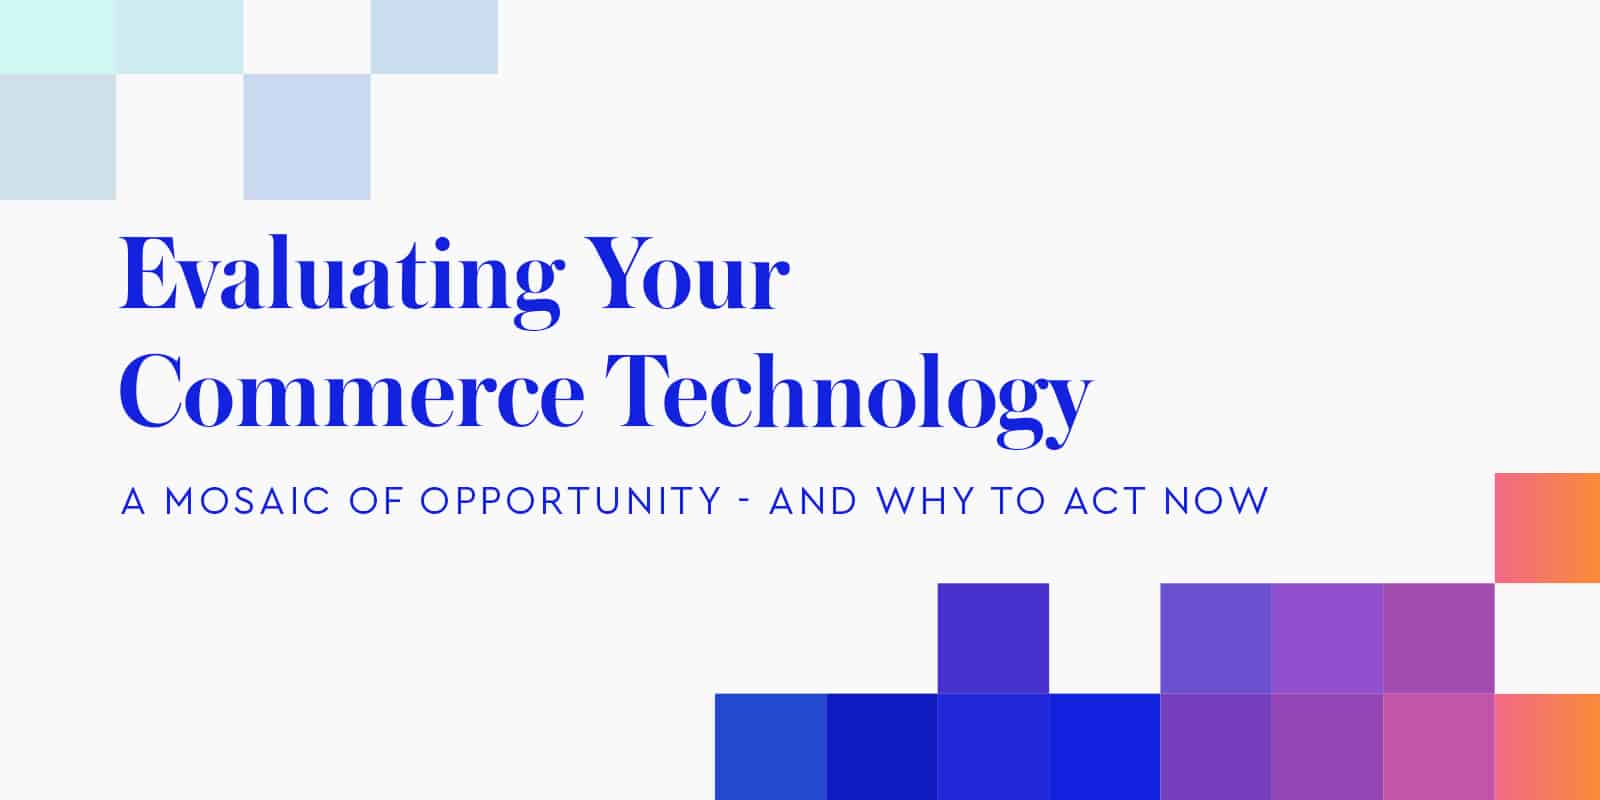 Evaluating your commerce technology: A mosaic of opportunity